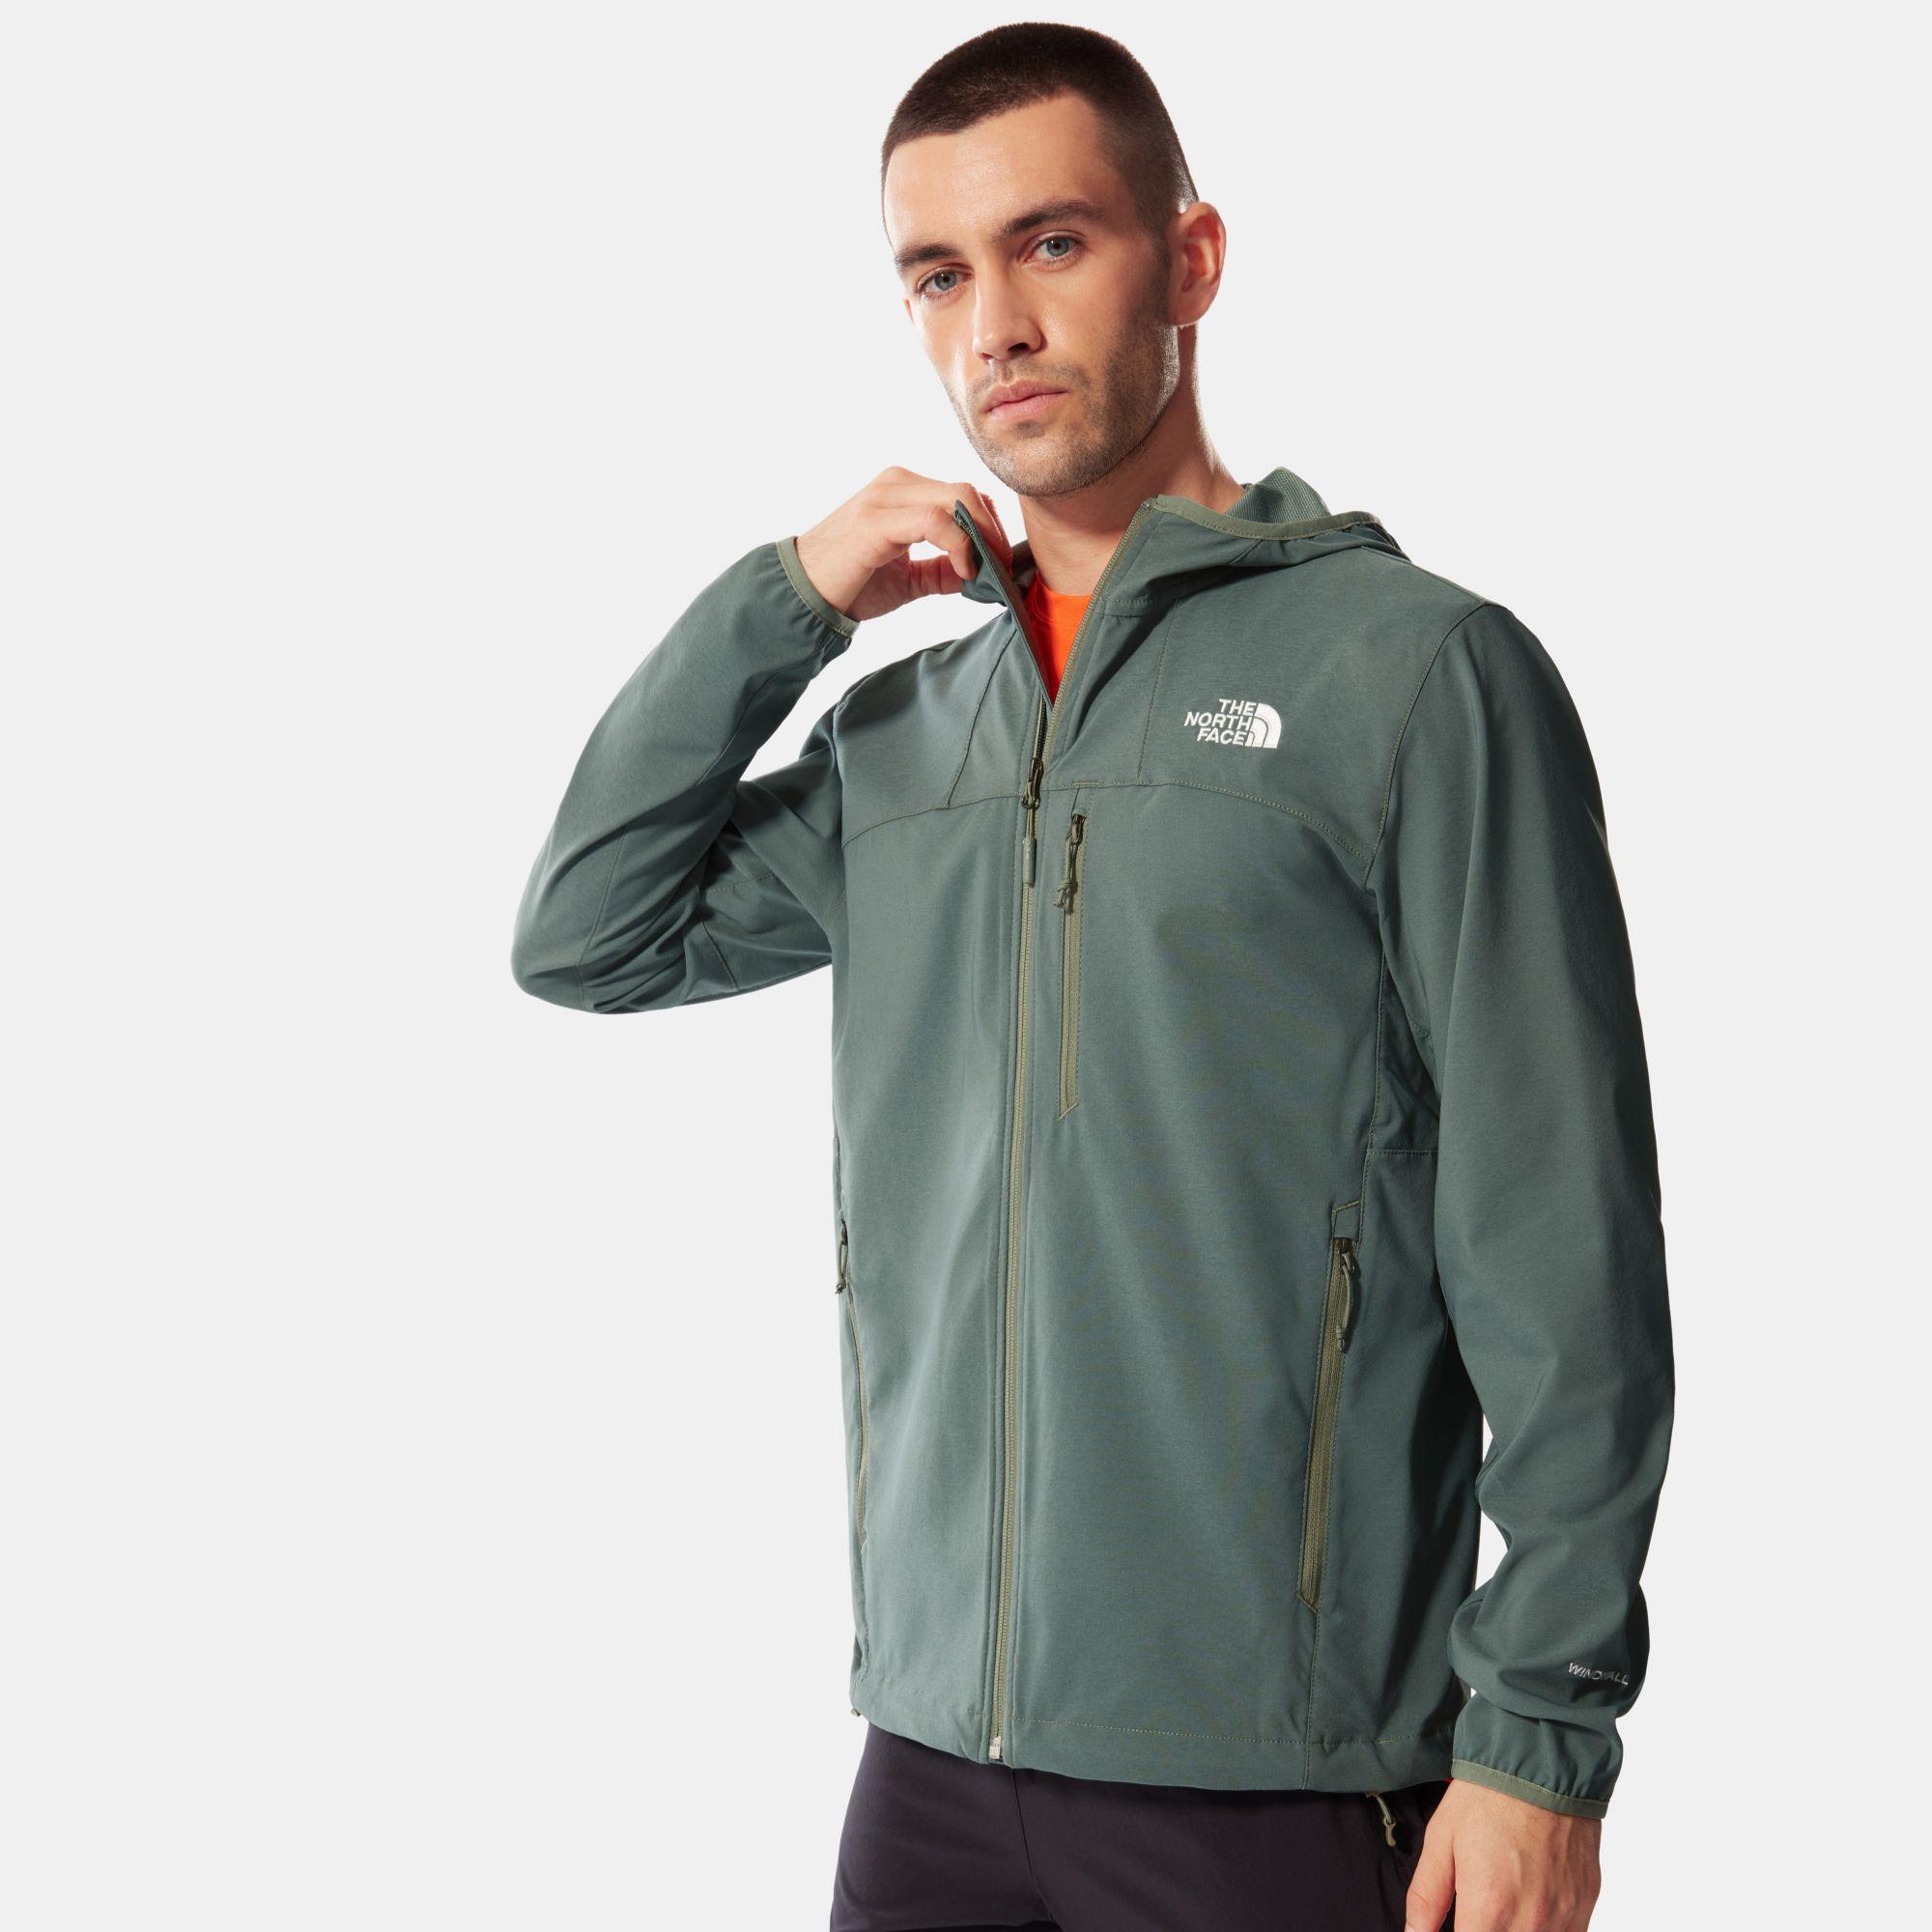 The North Face Nimble Hooded Jacket in Green for Men - Lyst